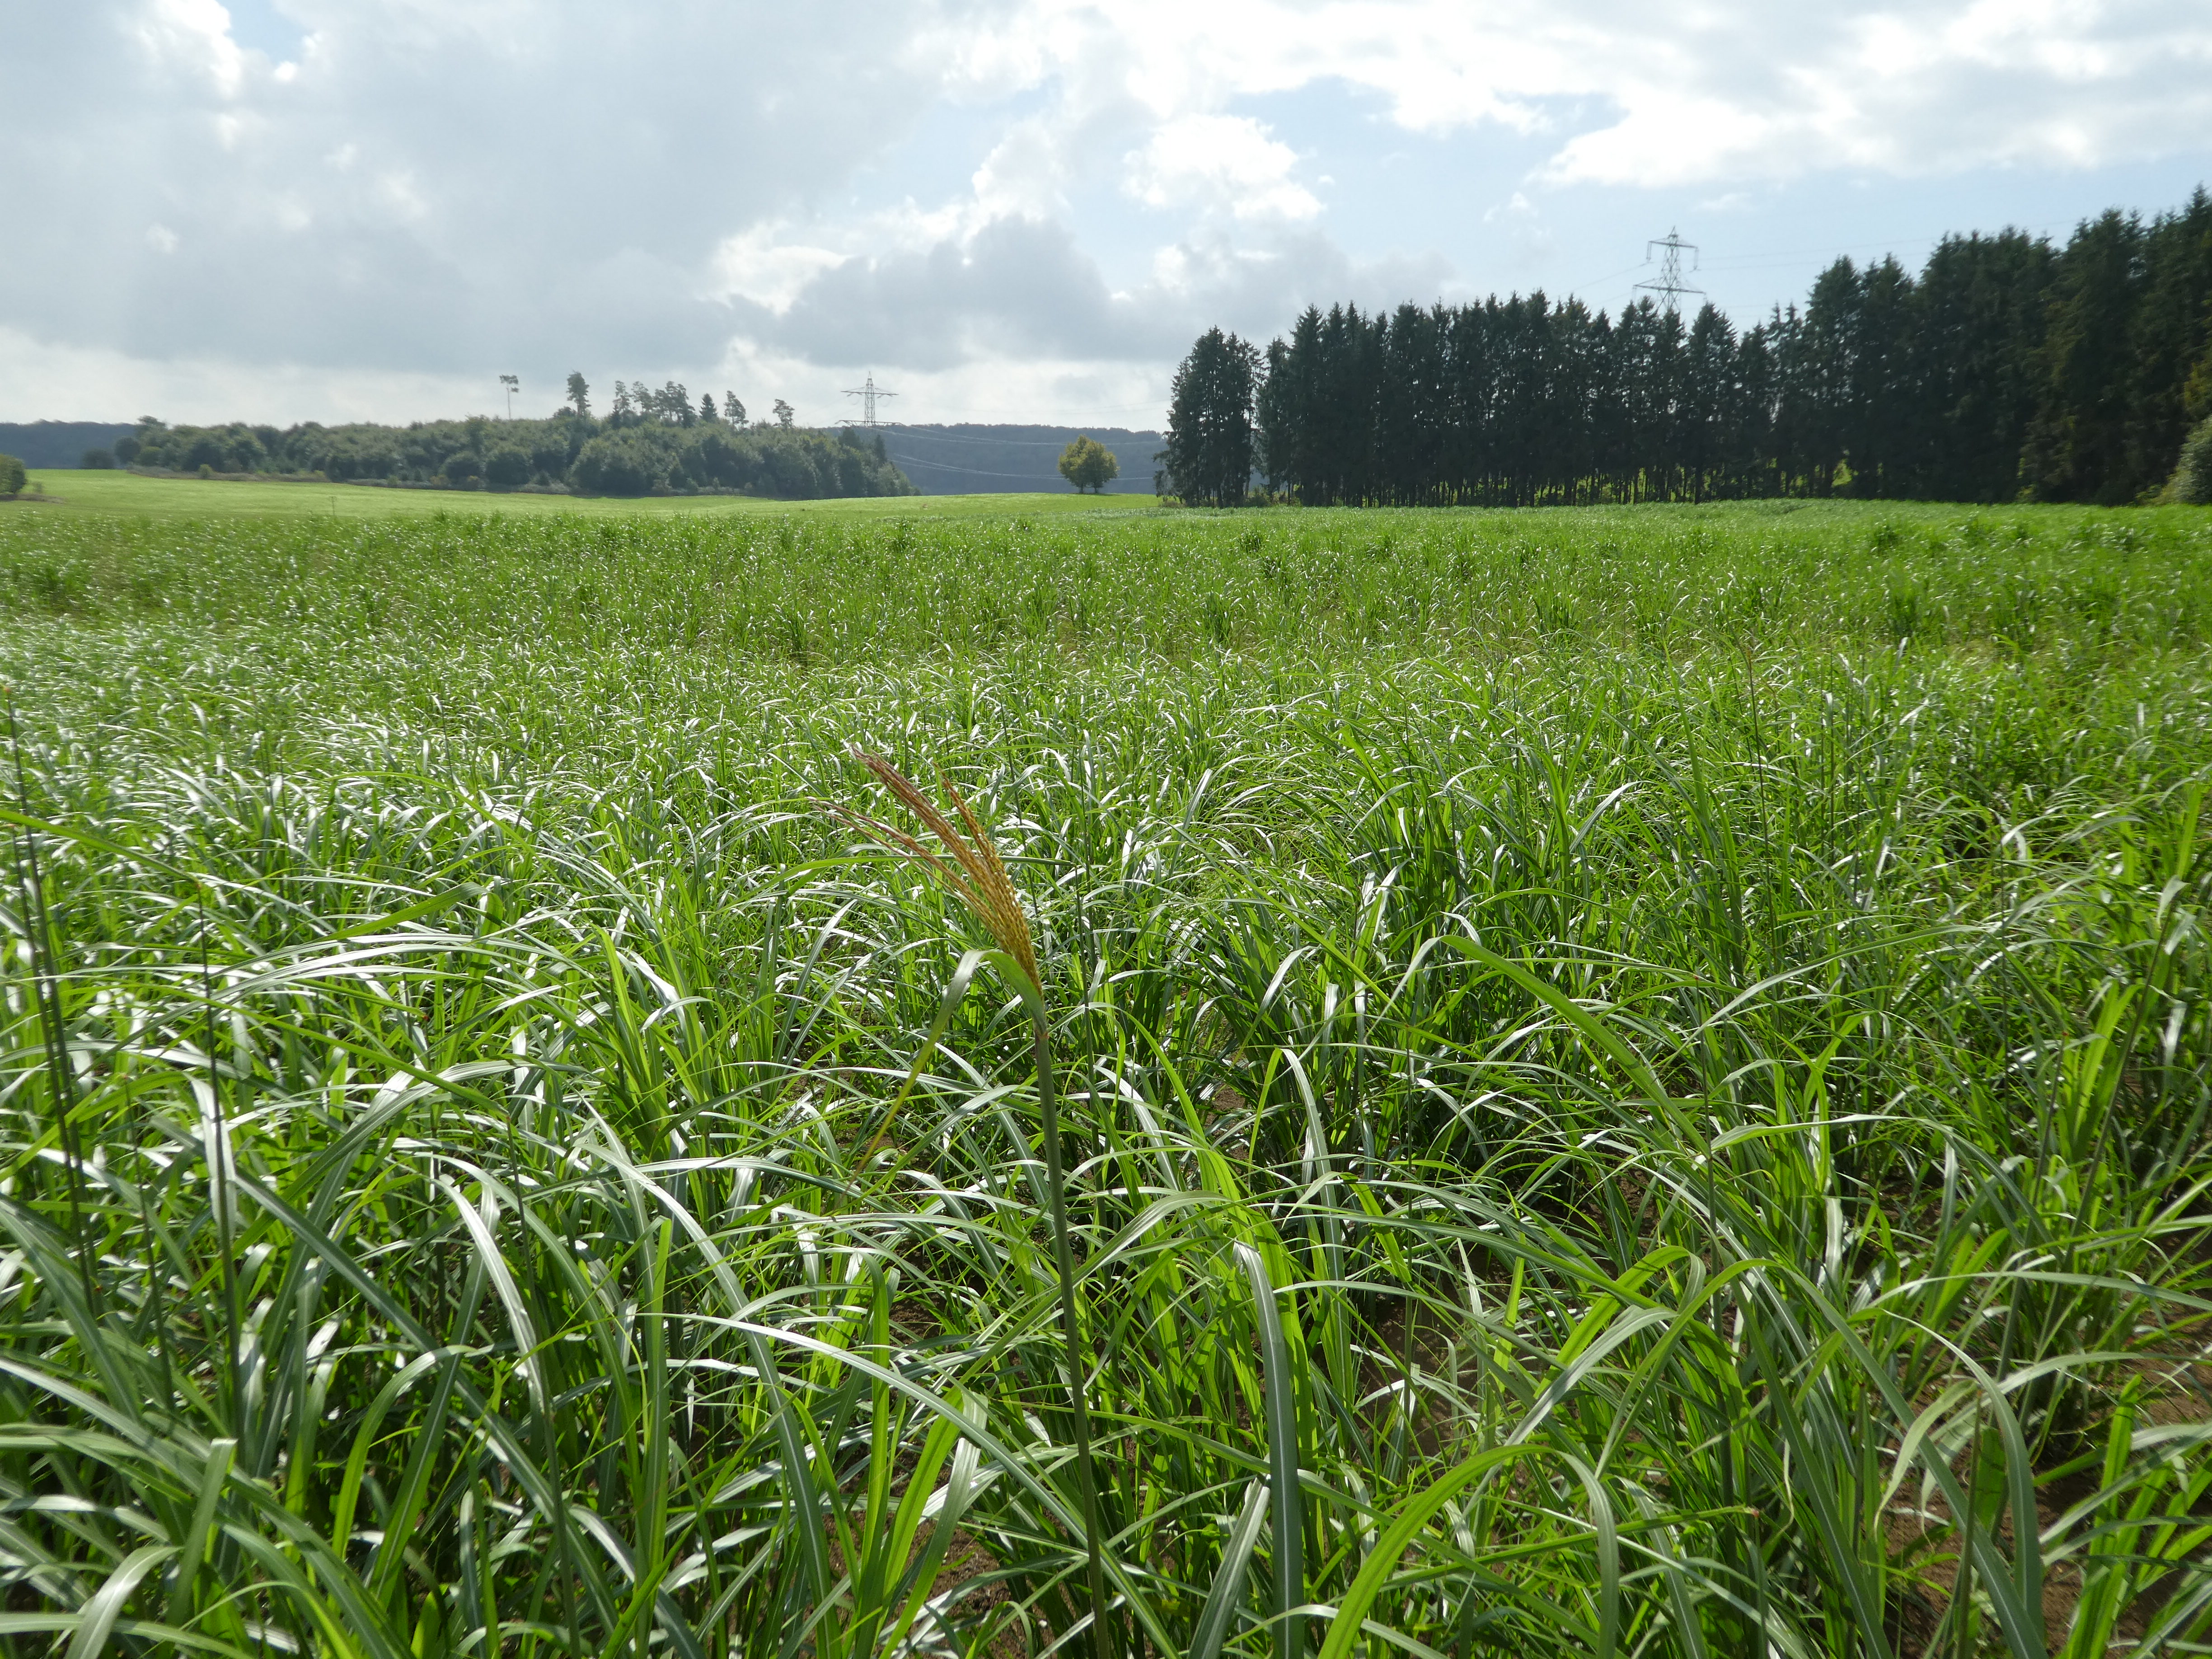 Photograph taken within a Miscanthus field: in the front third, grass-like, green plants; in the centre, a plant with an inflorescence consisting of dense, terminal panicles.